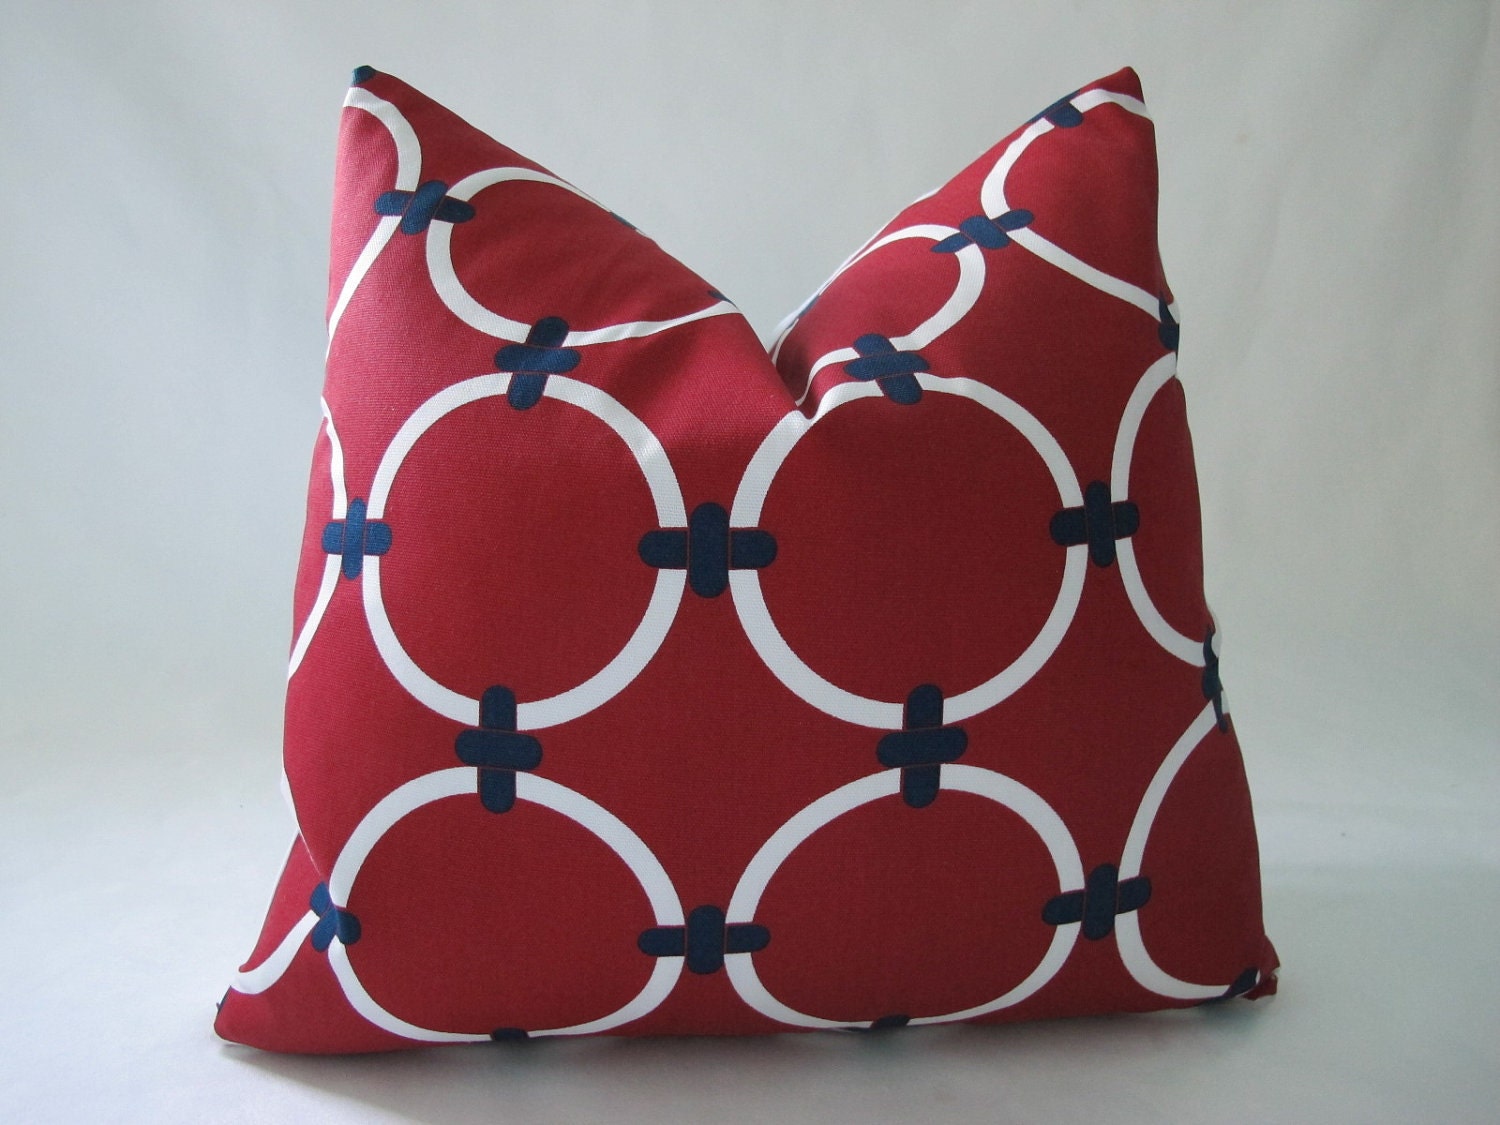 Free US Shipping--Decorative Designer Outdoor Pillow Cover-Chained Circles In Red And White-18 inch